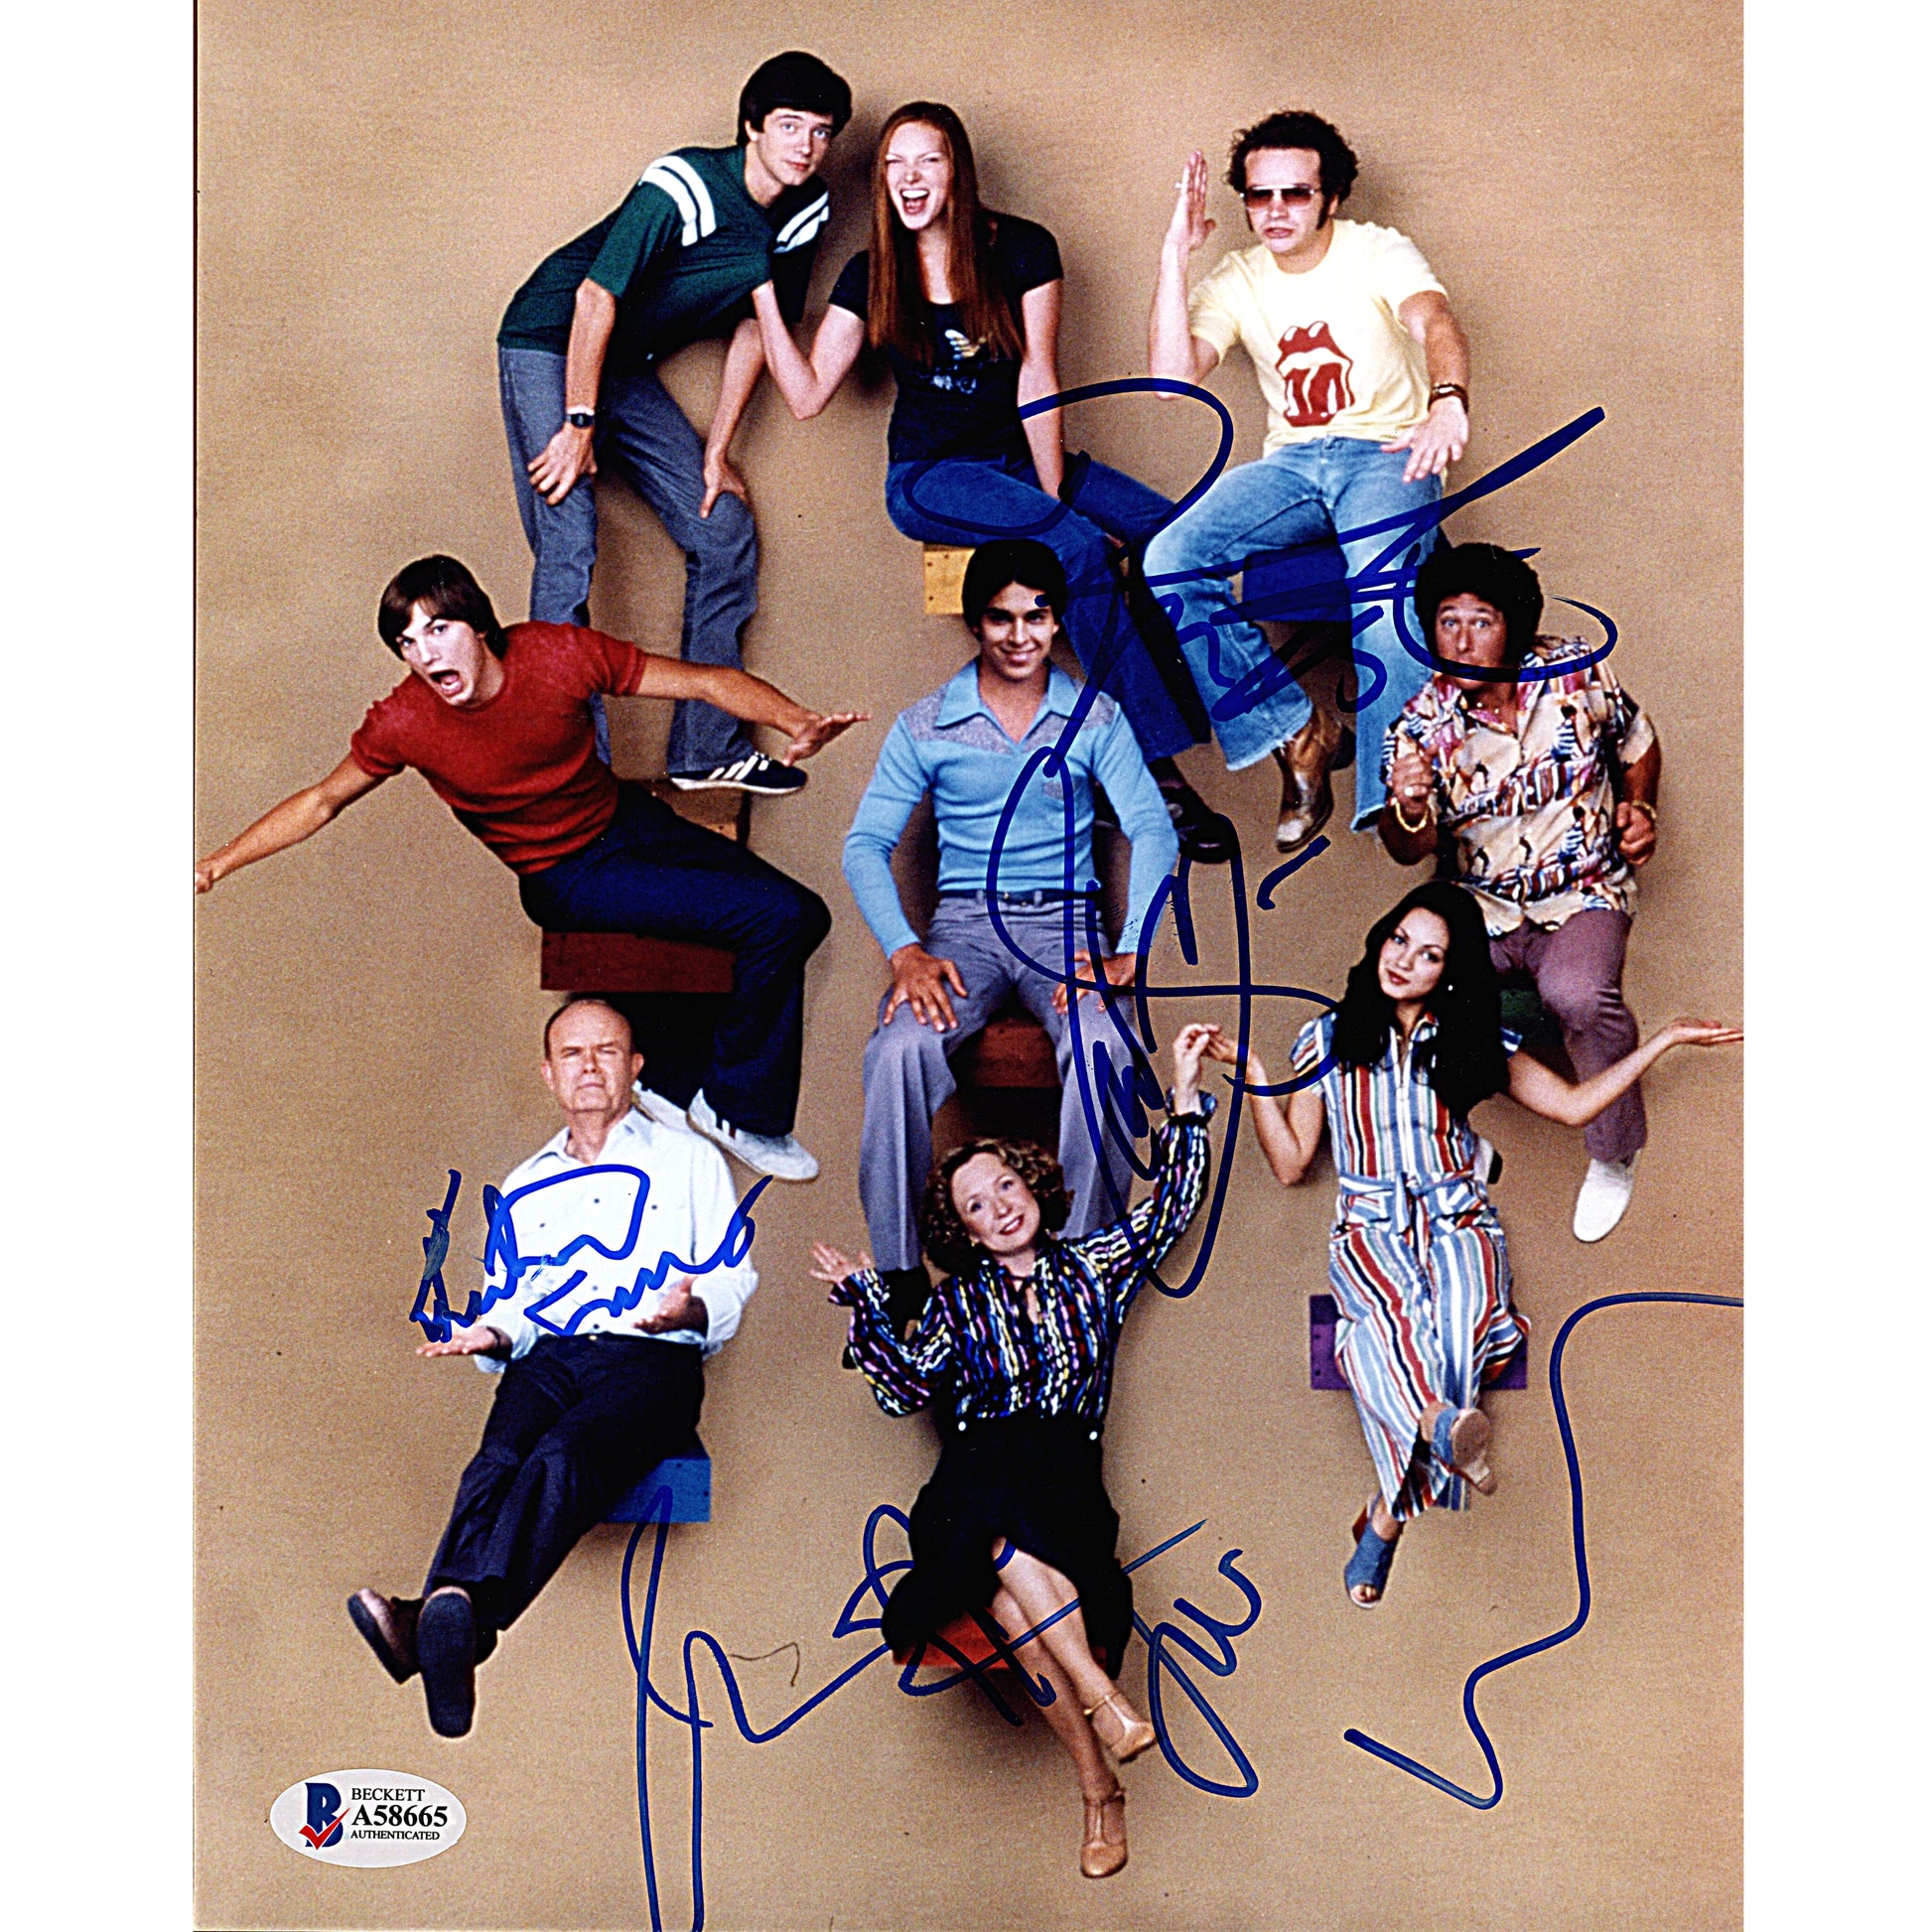 Hollywood- Autographed- That 70's Show 8x10 Photo Signed by Danny Masterson - Laura Prepon - Wilmer Valderrama - Mila Kunis - Kurtwood Smith - Beckett BAS Authentication A58665 - 101